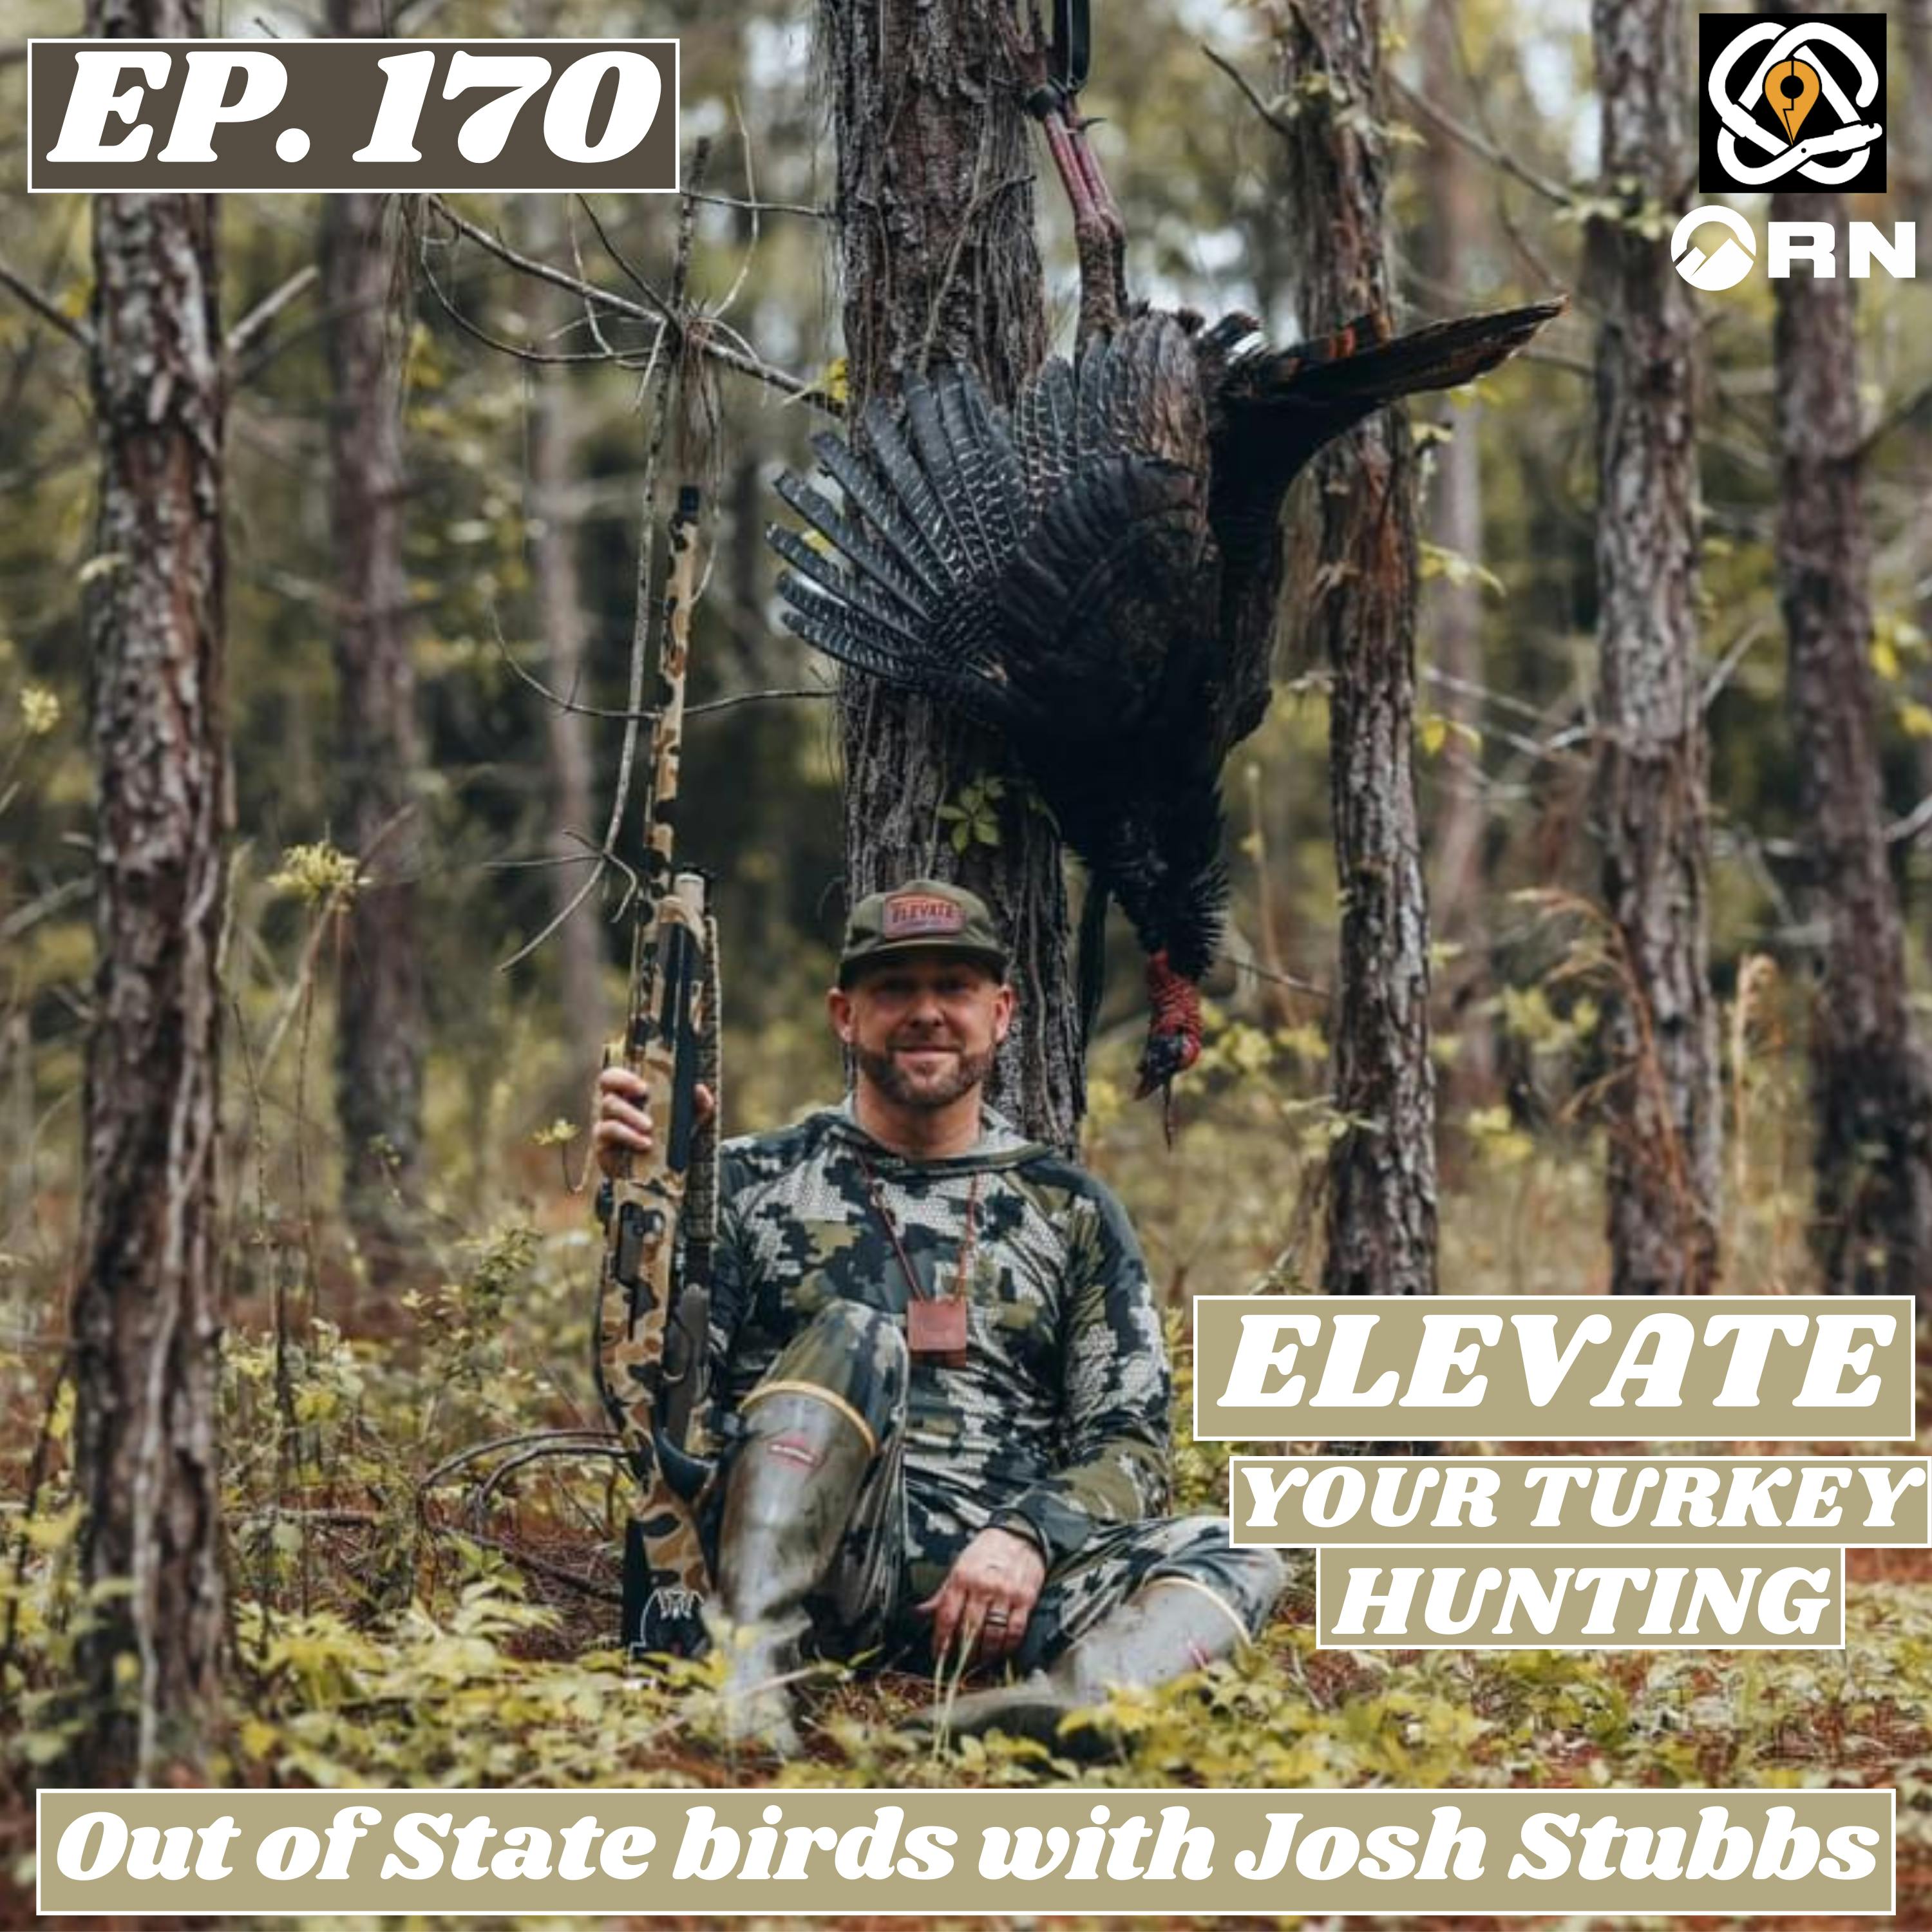 "Elevate" Your Turkey Hunting: Out Of State Birds with Josh Stubbs